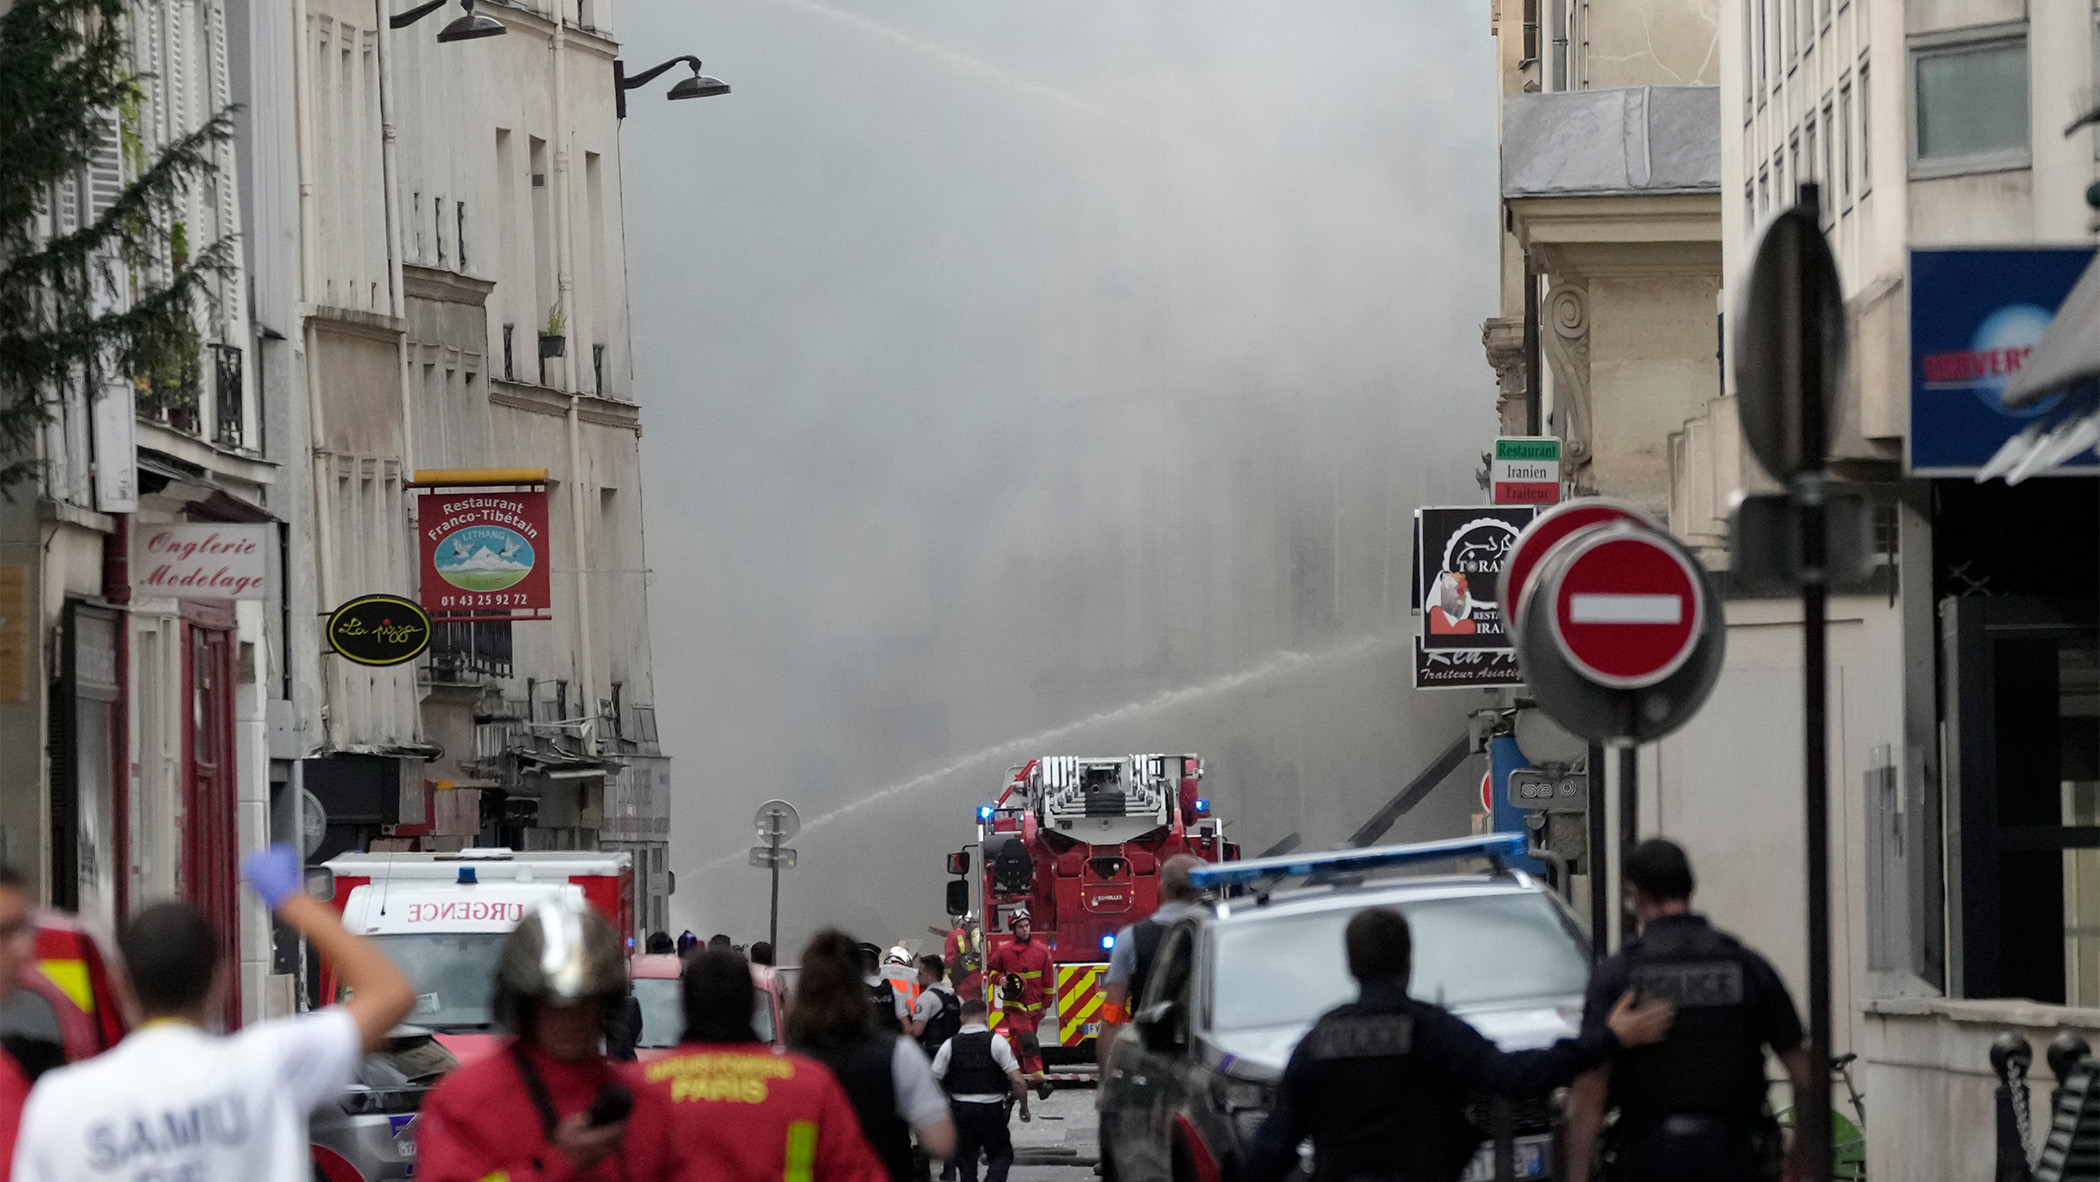 Explosion Paris, France: Blast hits building, injuring 24; police trying to determine cause